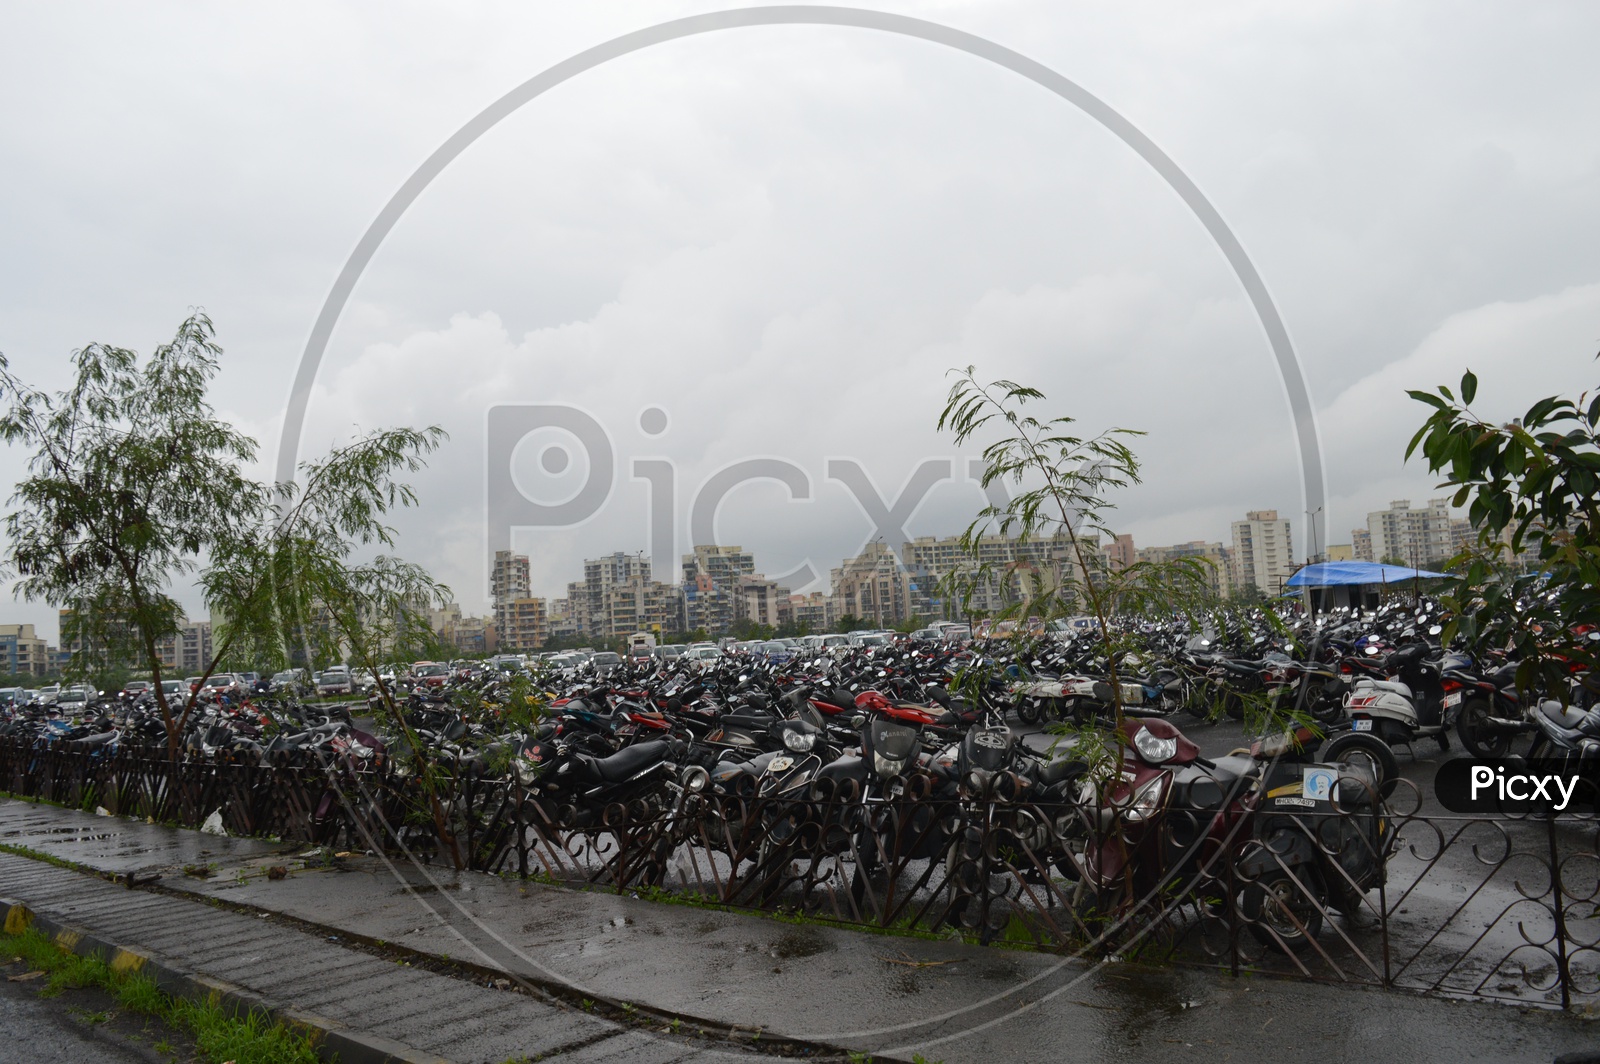 Vehicles in the parking area - Bike and Motor cycles